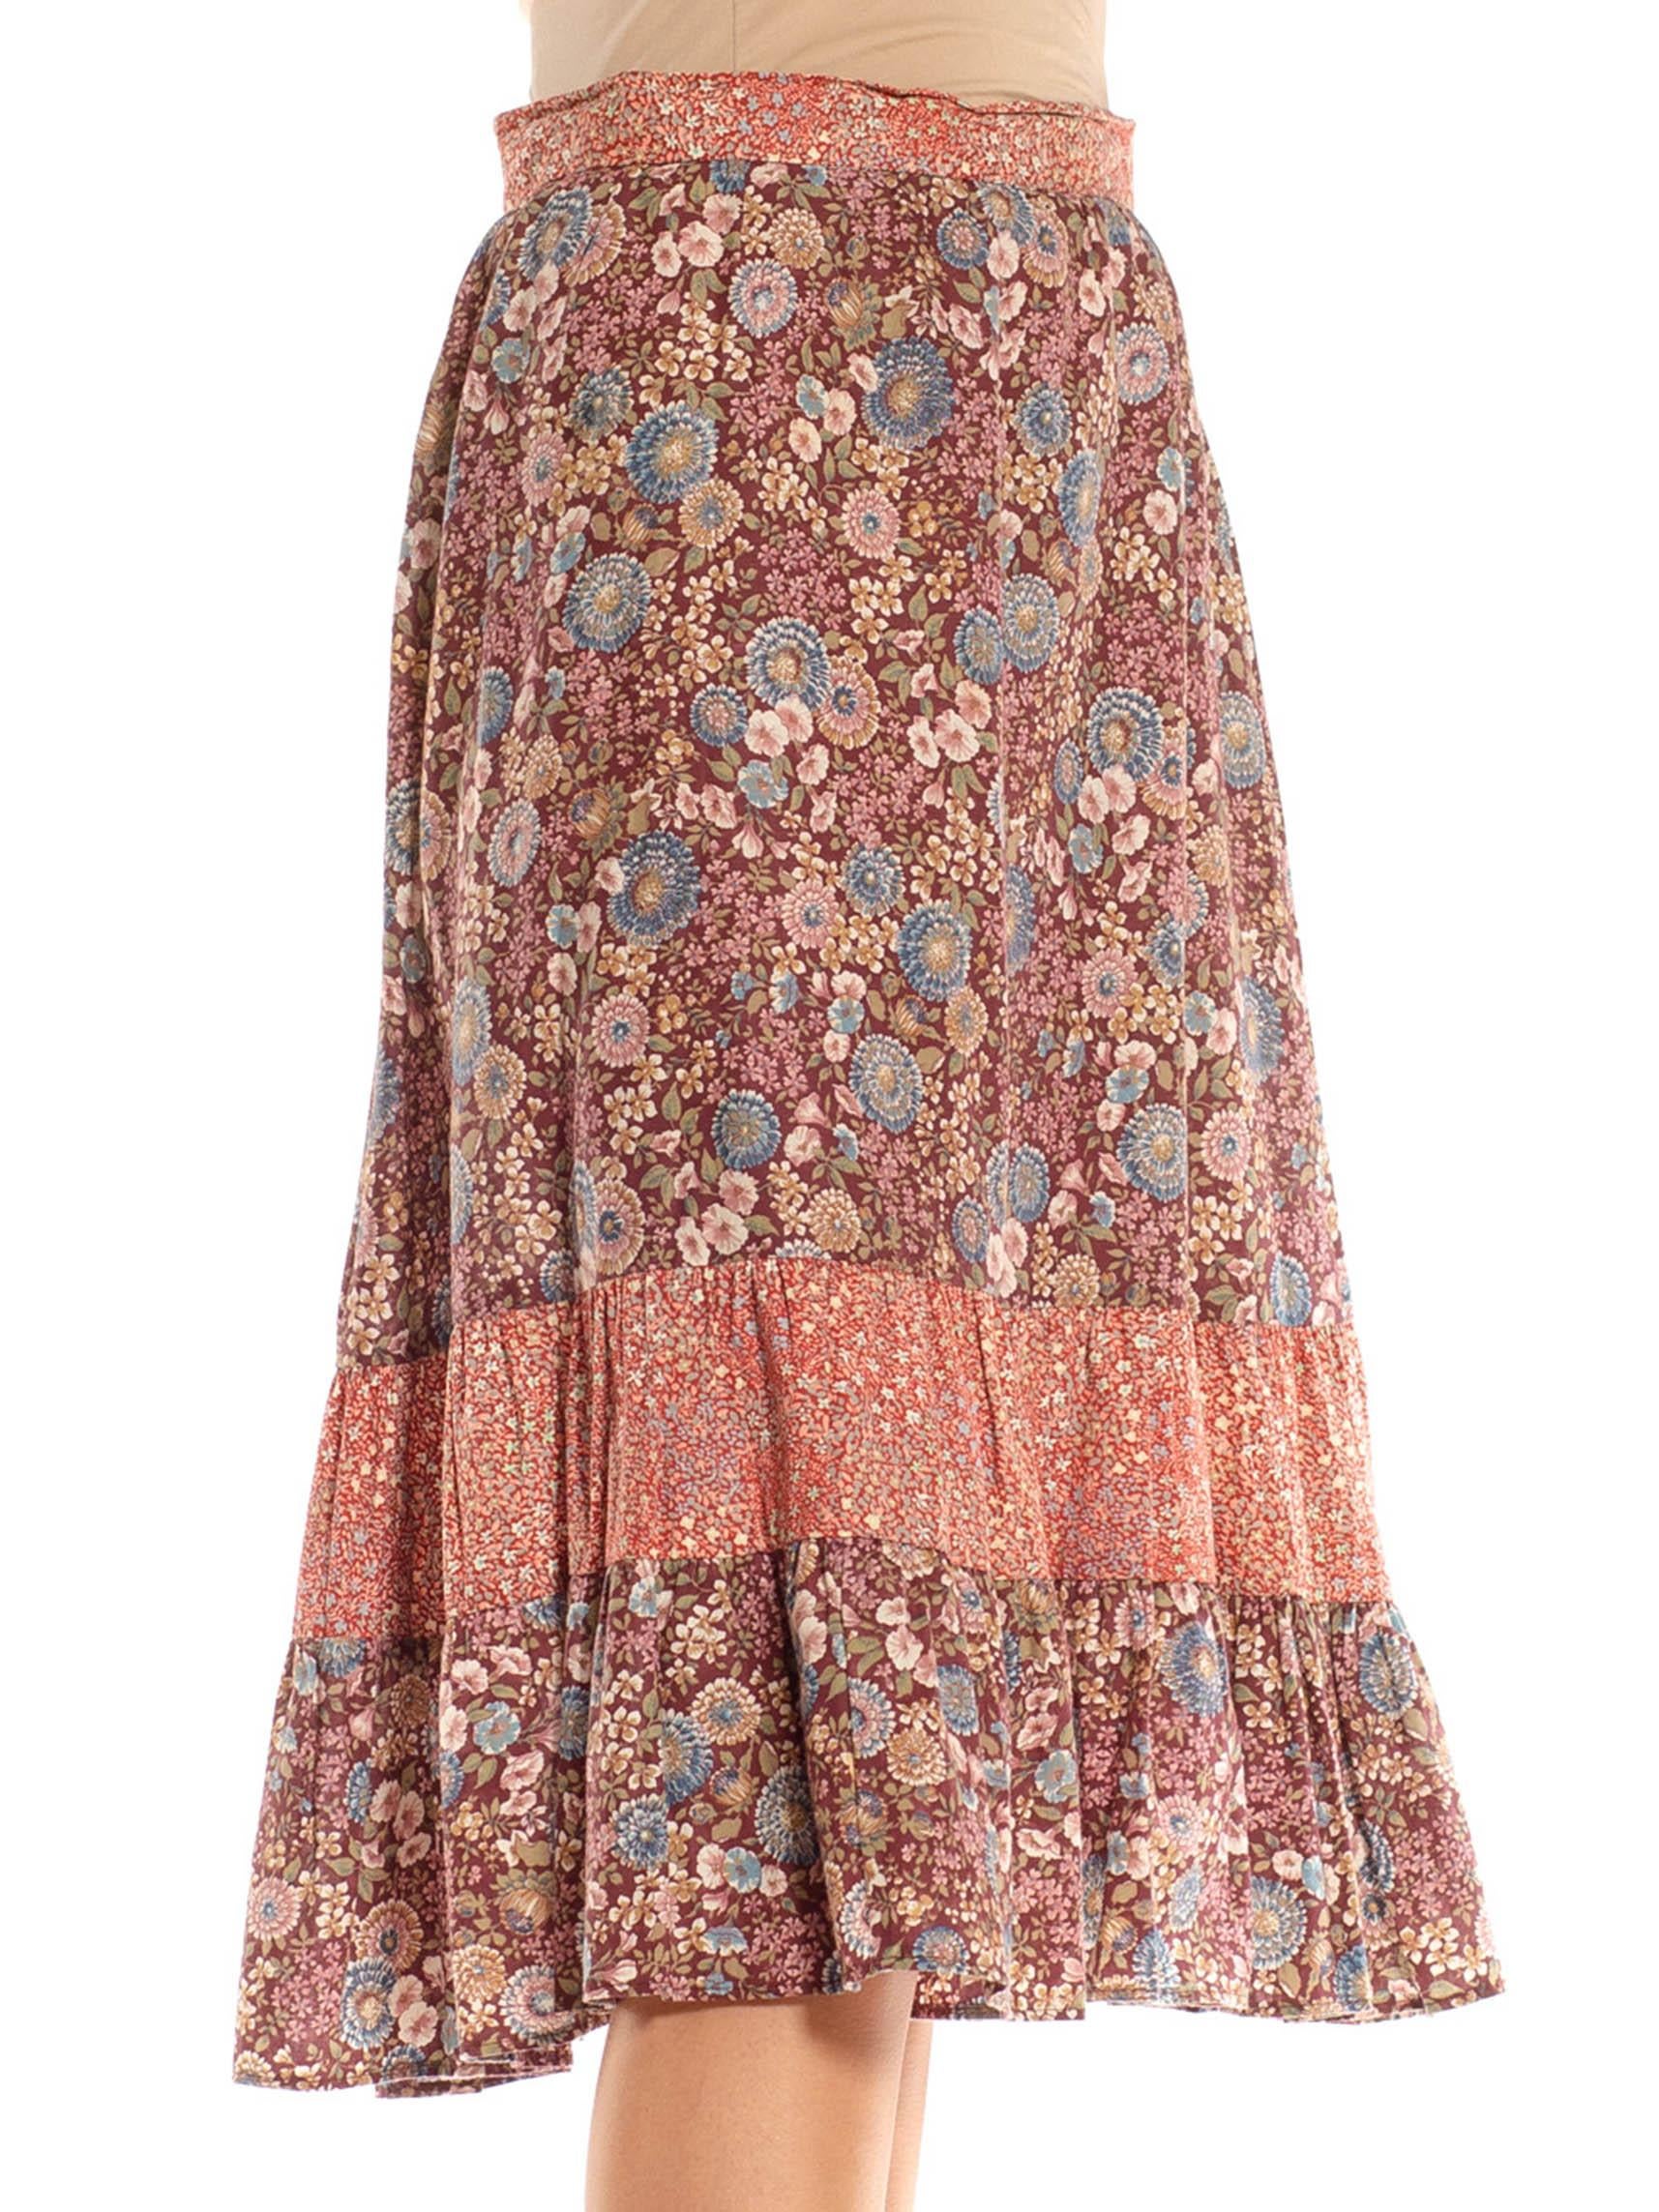 1970S Burgundy & Dusty Pink Cotton Ditsy Floral Print Mix Skirt In Excellent Condition For Sale In New York, NY